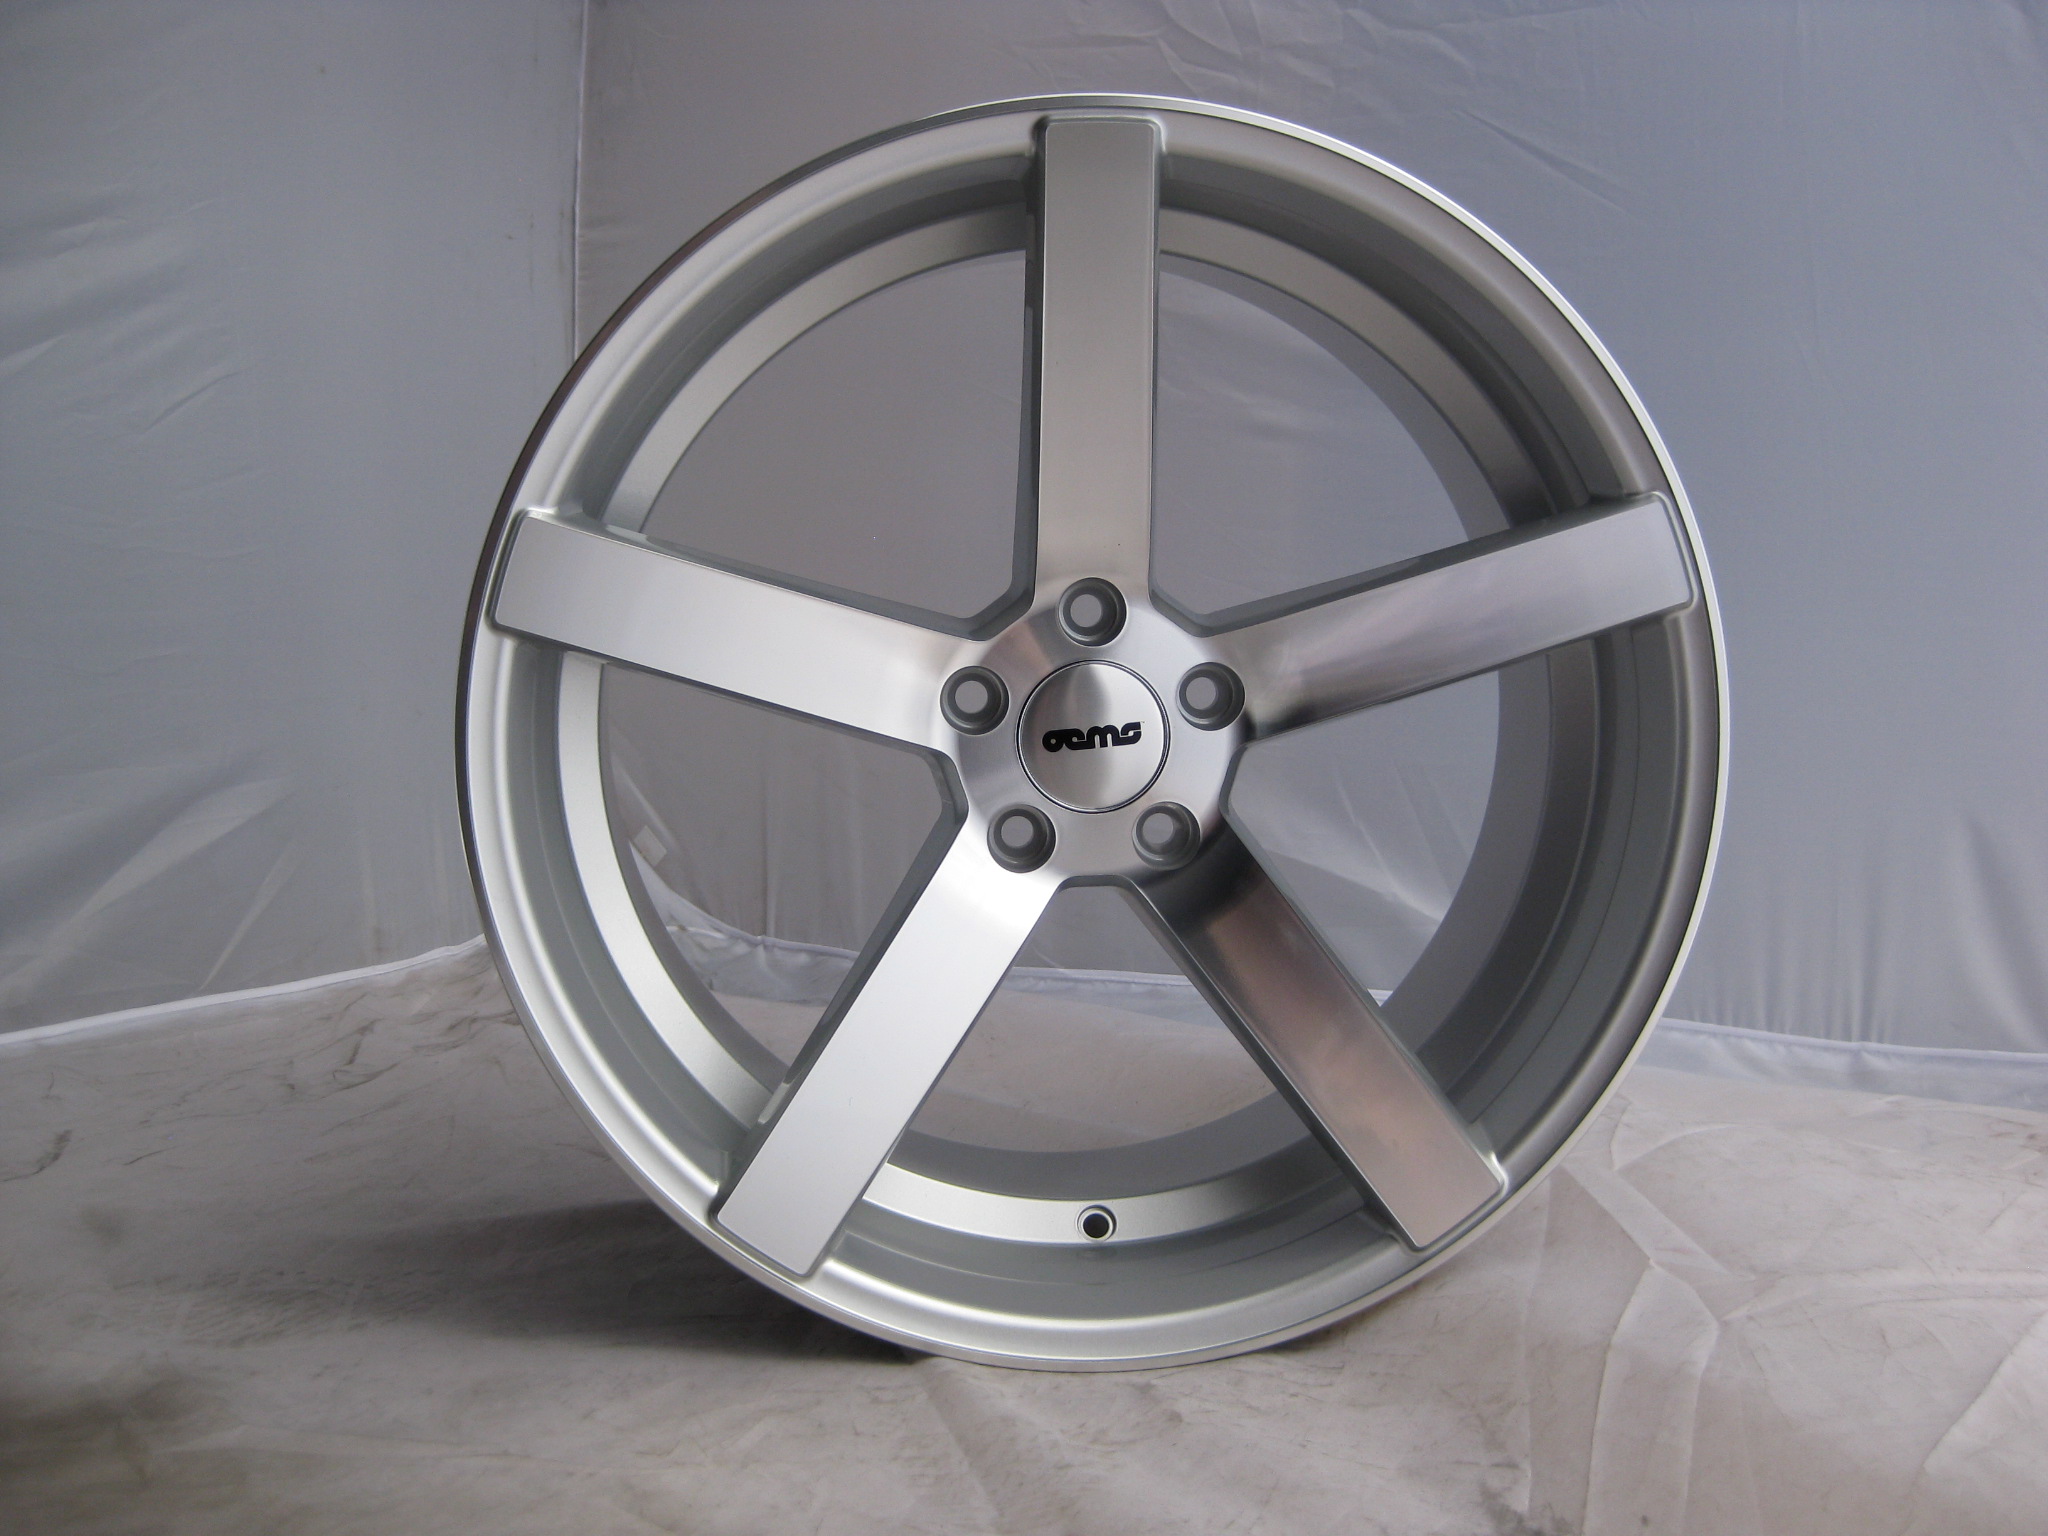 NEW 20  OEMS 115 DEEP CONCAVE ALLOY WHEELS IN SILVER POL WITH DEEP DISH  WIDER 10  REAR et35 42